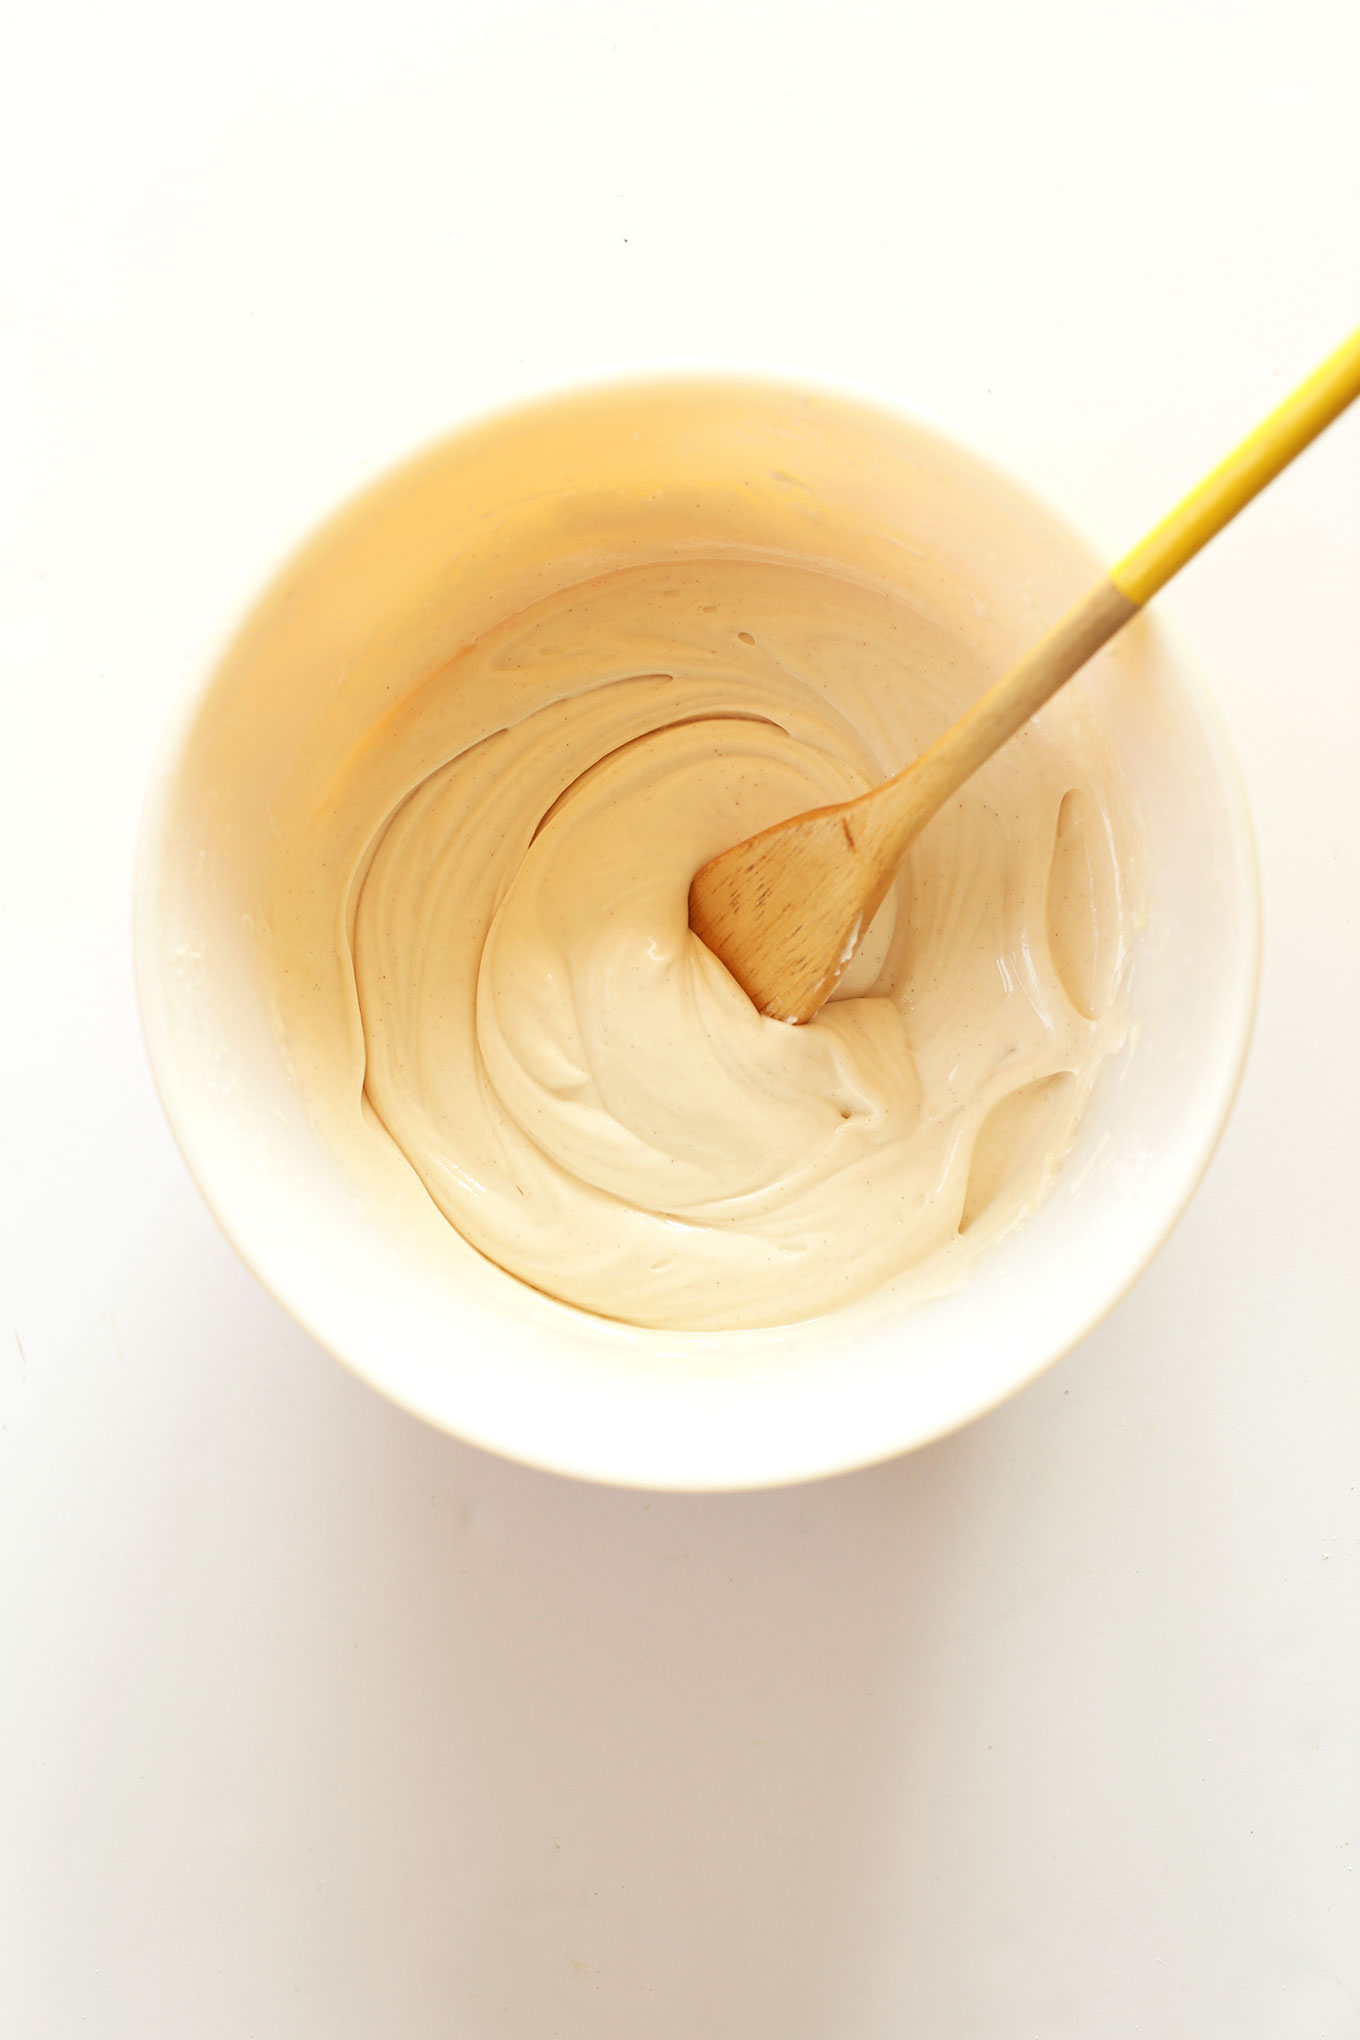 Stirring together a batch of our Vegan Cream Cheese Frosting recipe